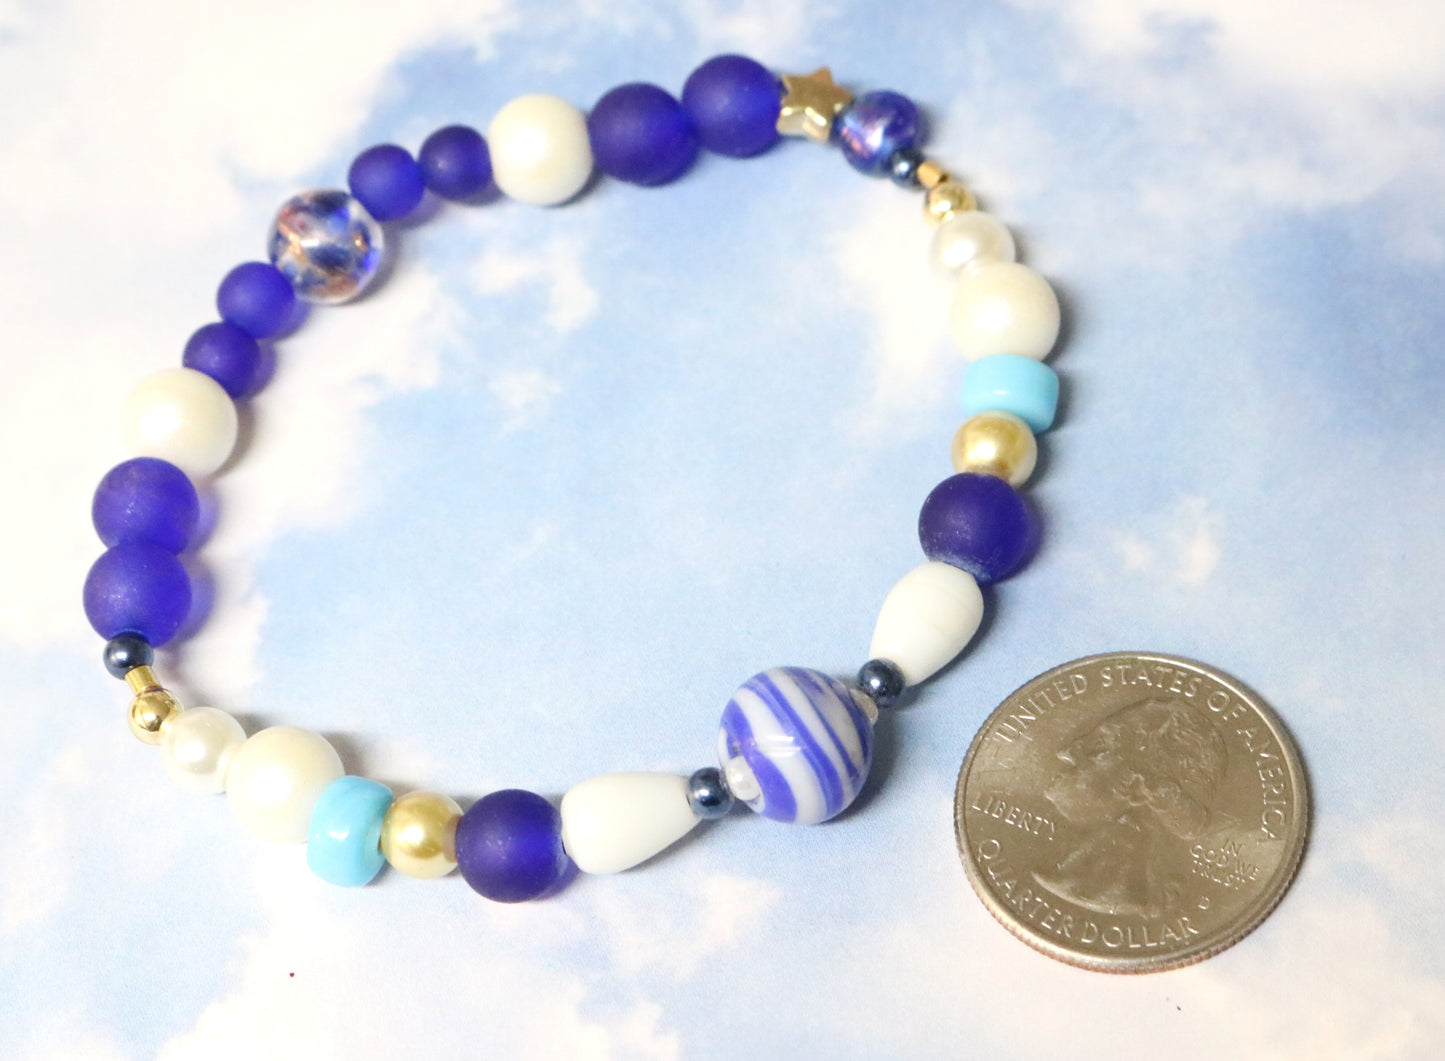 Your Grandmother's Blue and White China Inspired Handmade Artisan Bracelet by Monkey's Mojo